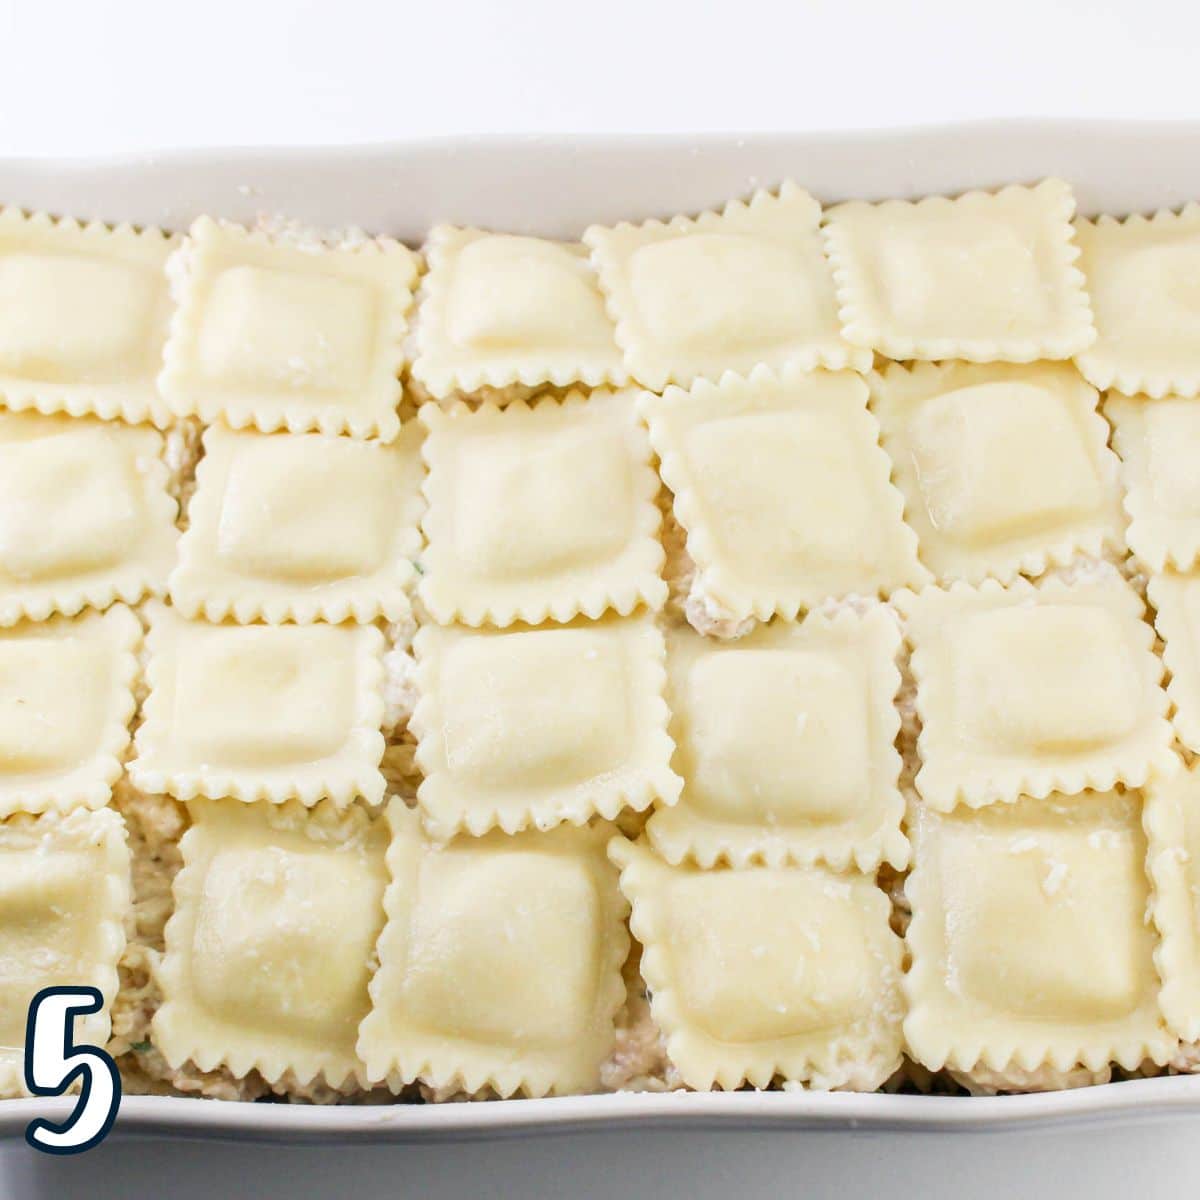 A baking dish filled with an even layer of cooked ravioli arranged in a grid pattern. The number 5 is displayed in the bottom left corner.